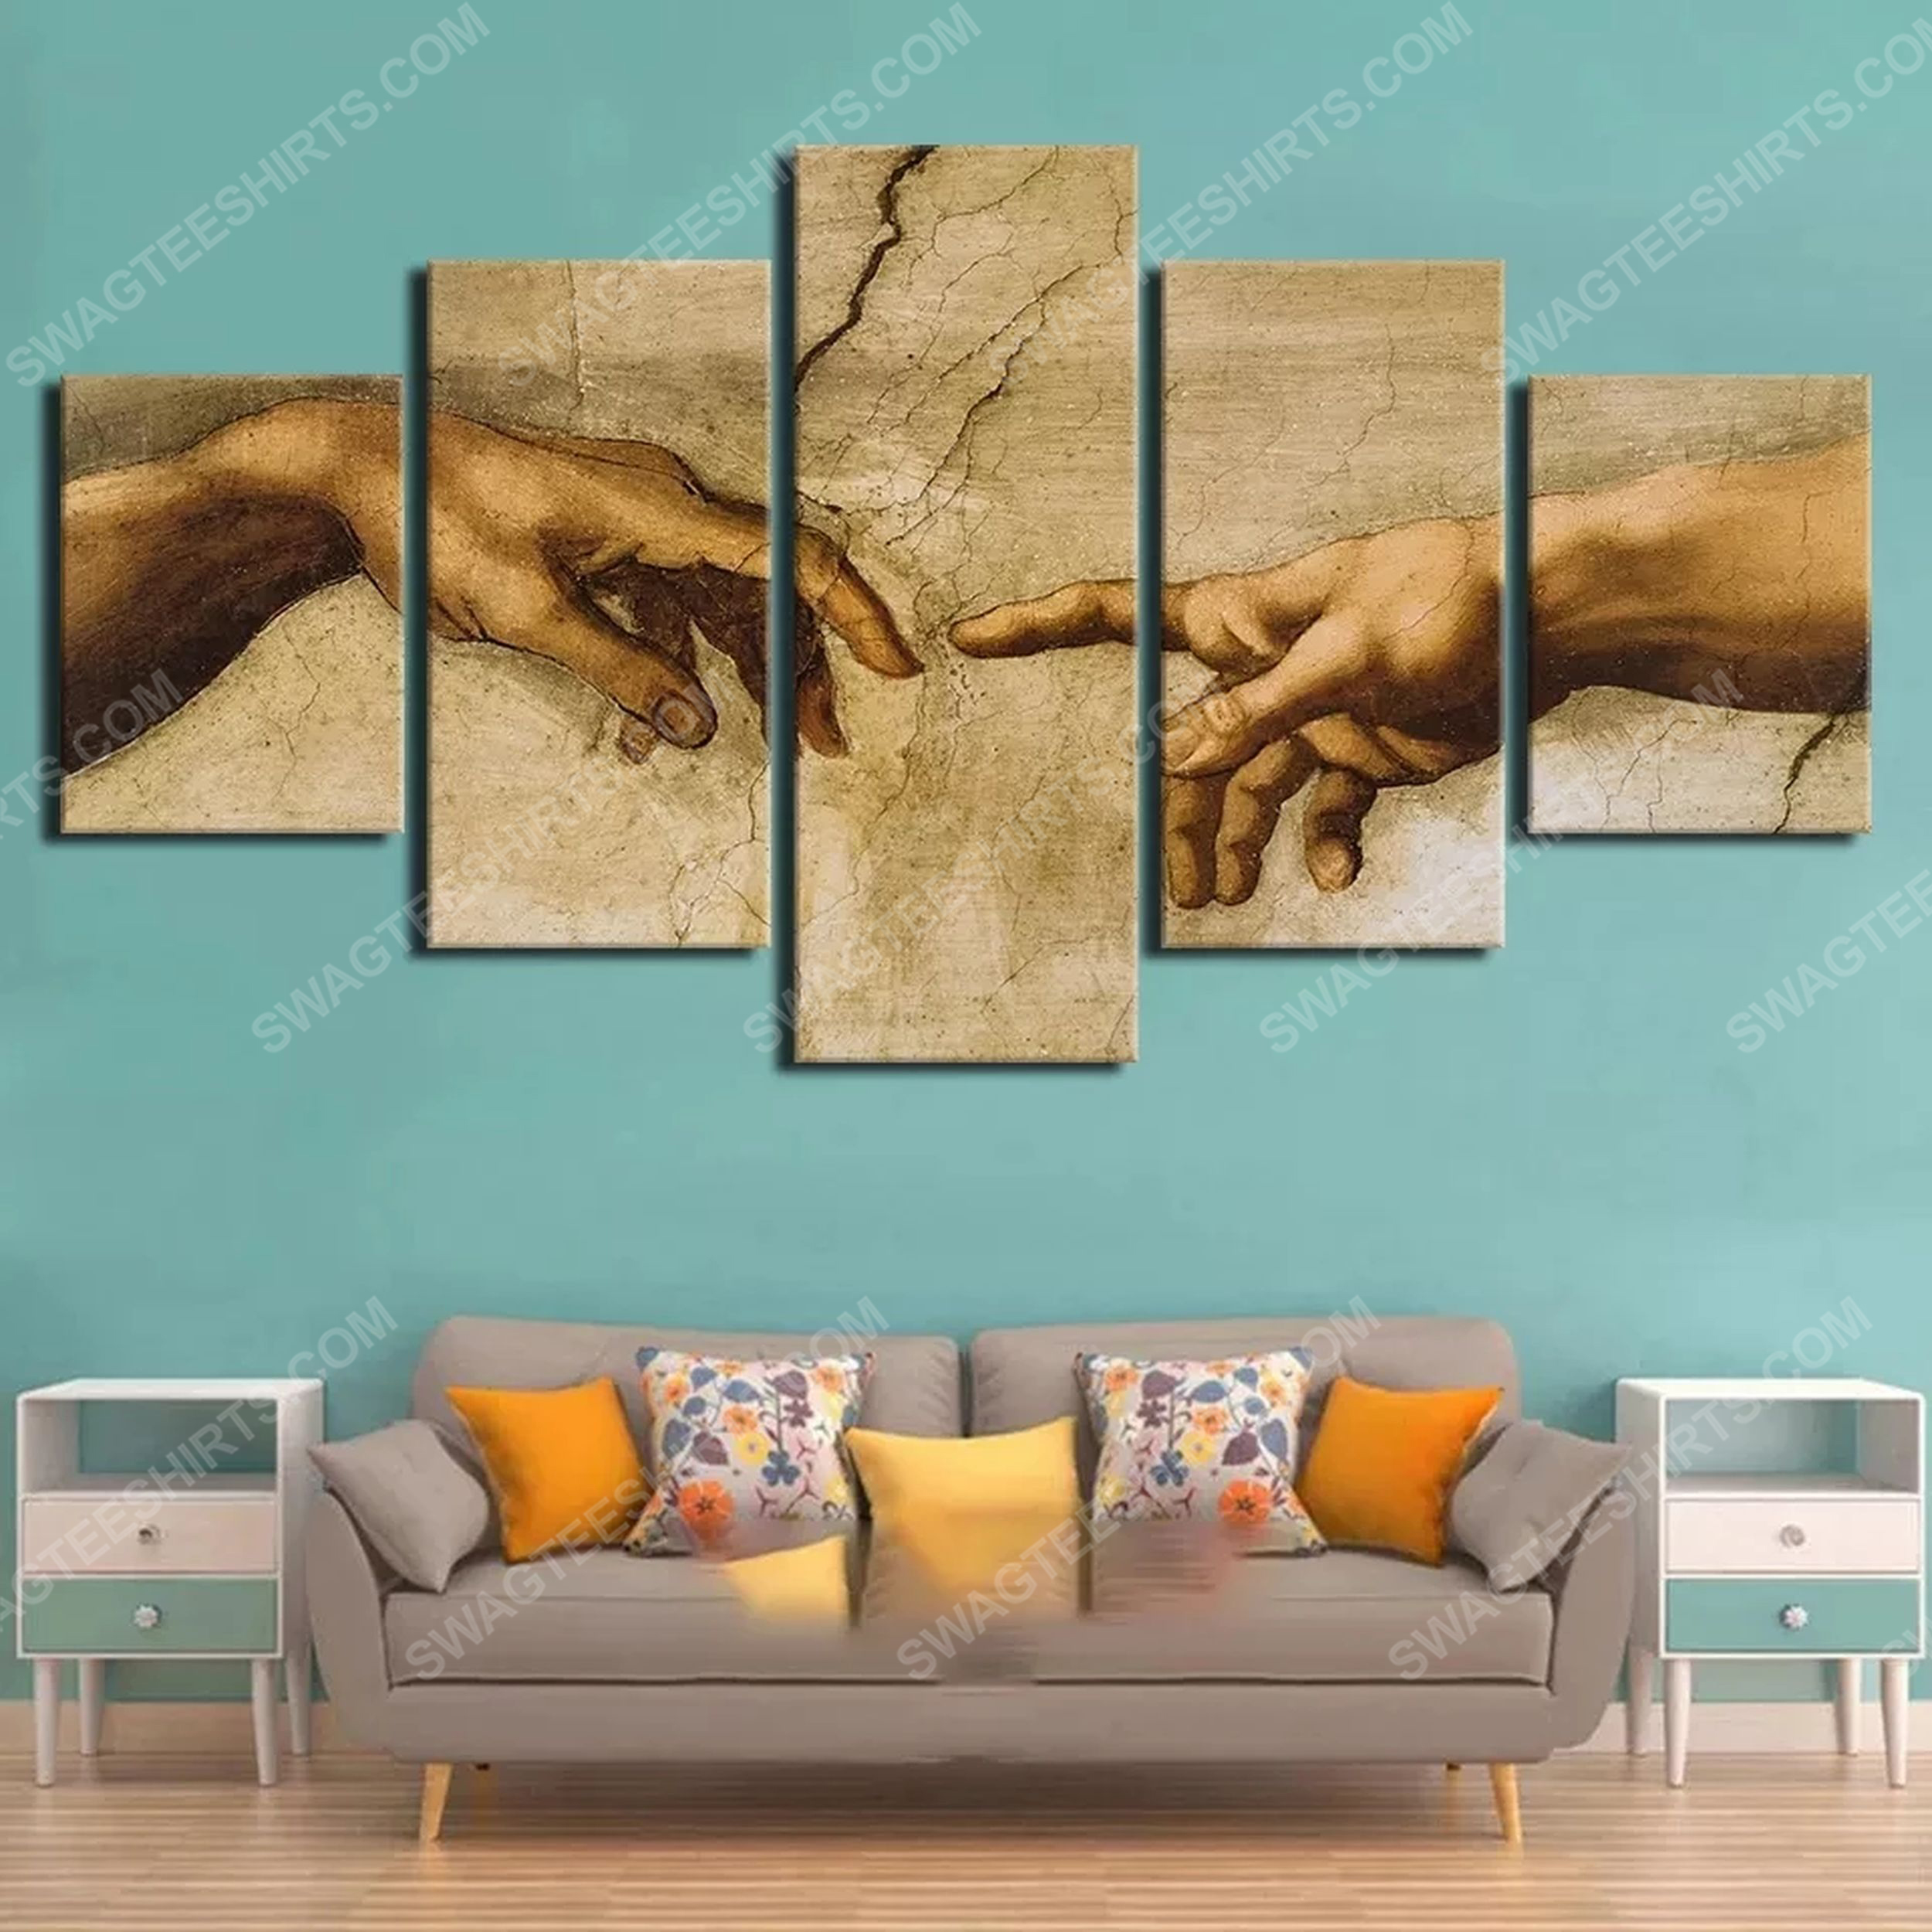 [special edition] Adam hand of god print painting canvas wall art home decor – maria